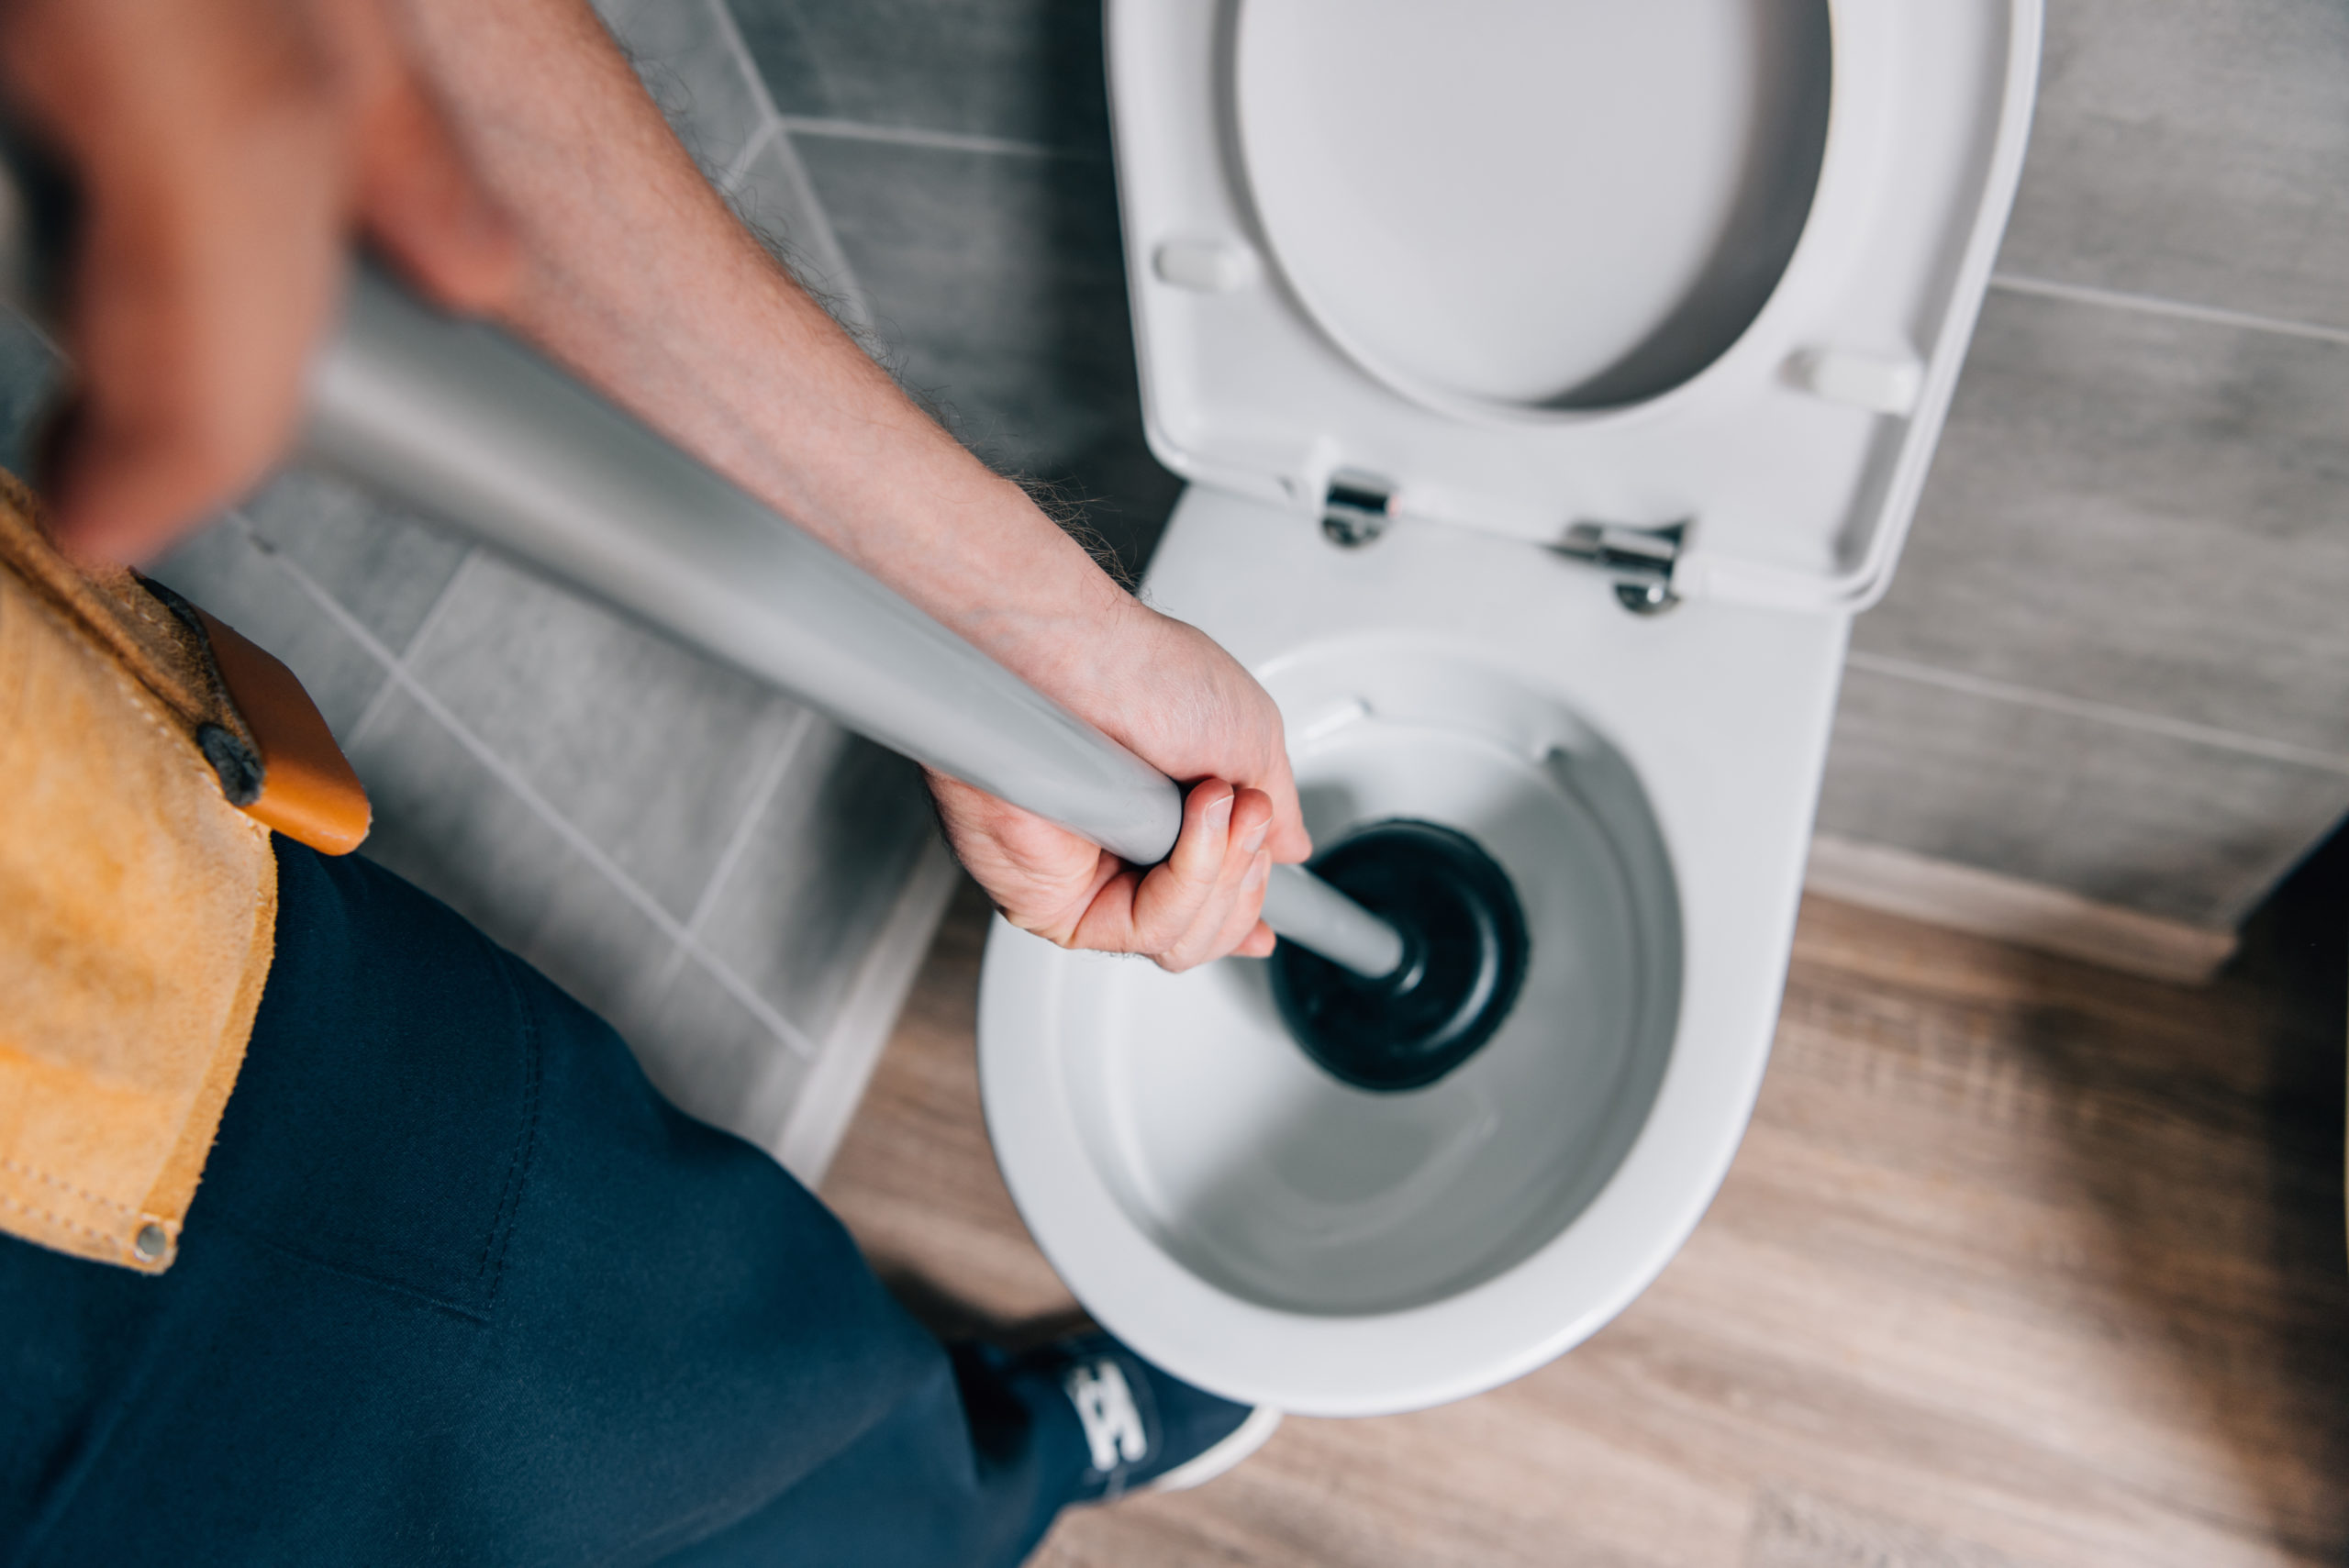 How To Fix a Clogged Toilet - Service Pros Plumbing